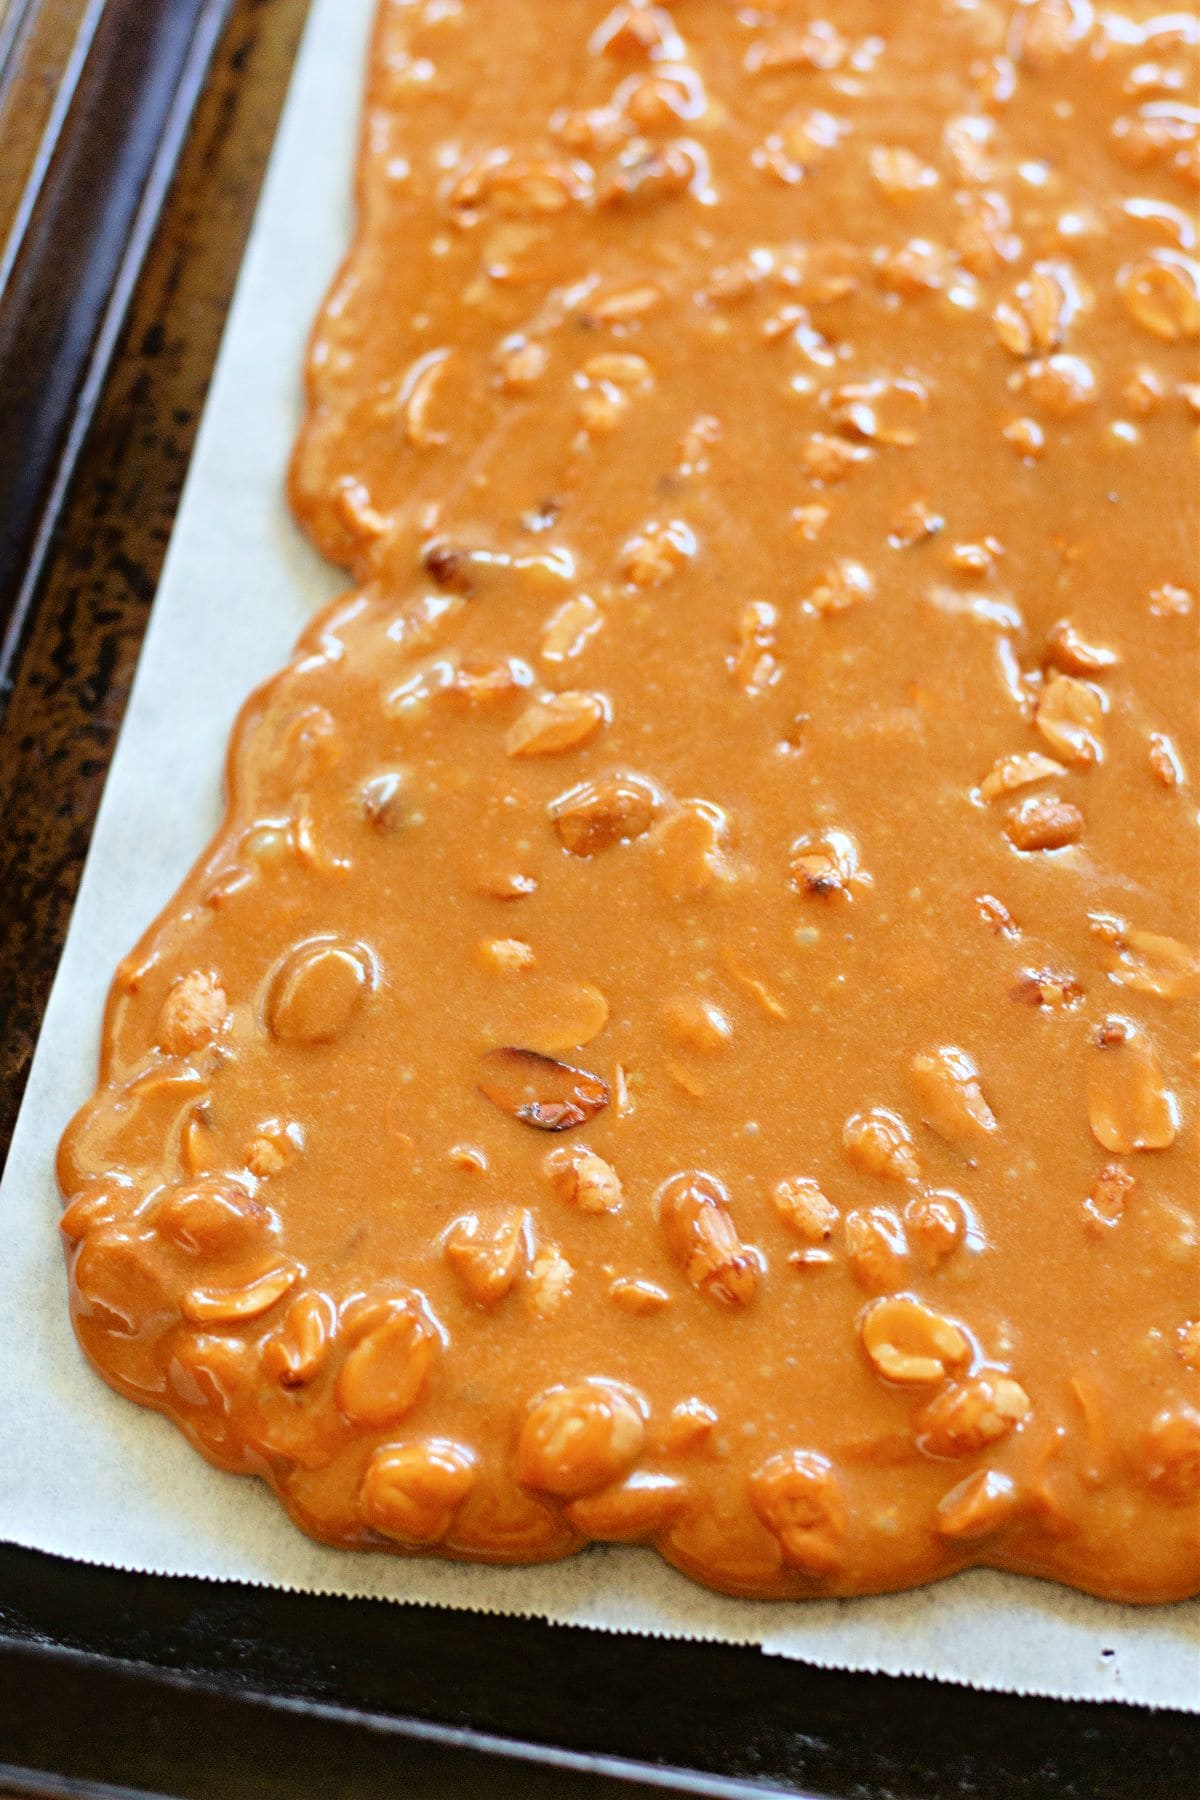 the peanut brittle cooling on parchment paper